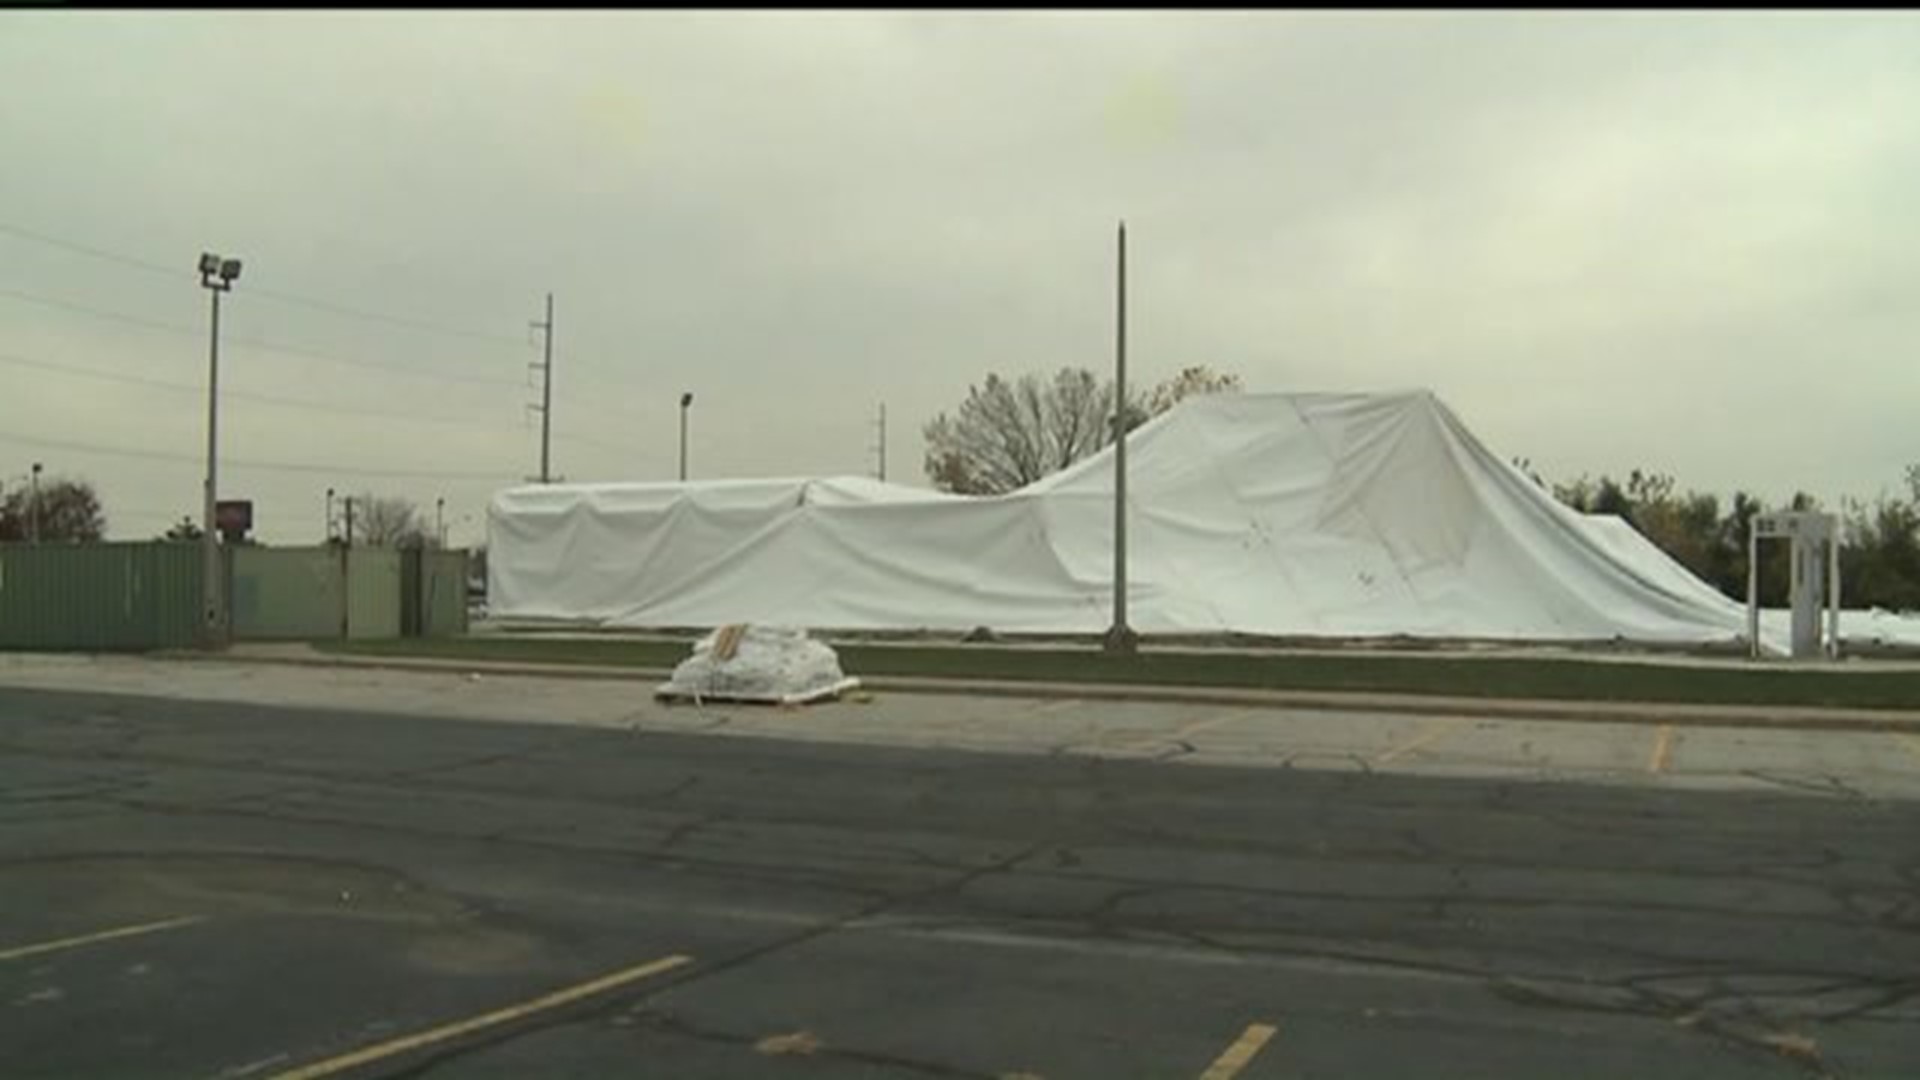 St. Ambrose deflates dome, building new one